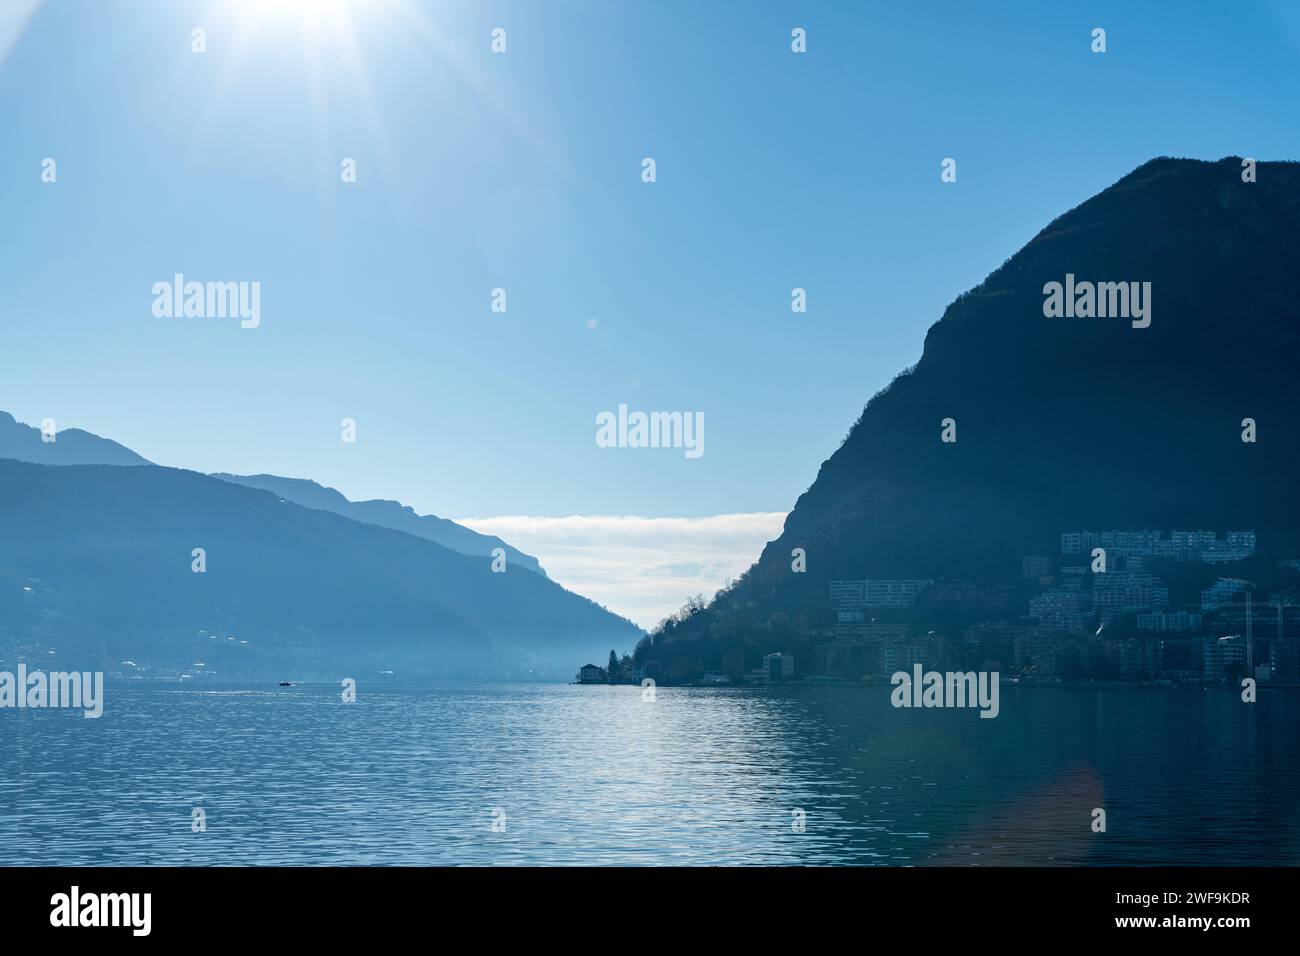 A view across Lake Lugano looking at the Alps mountains in Switzerland Stock Photo